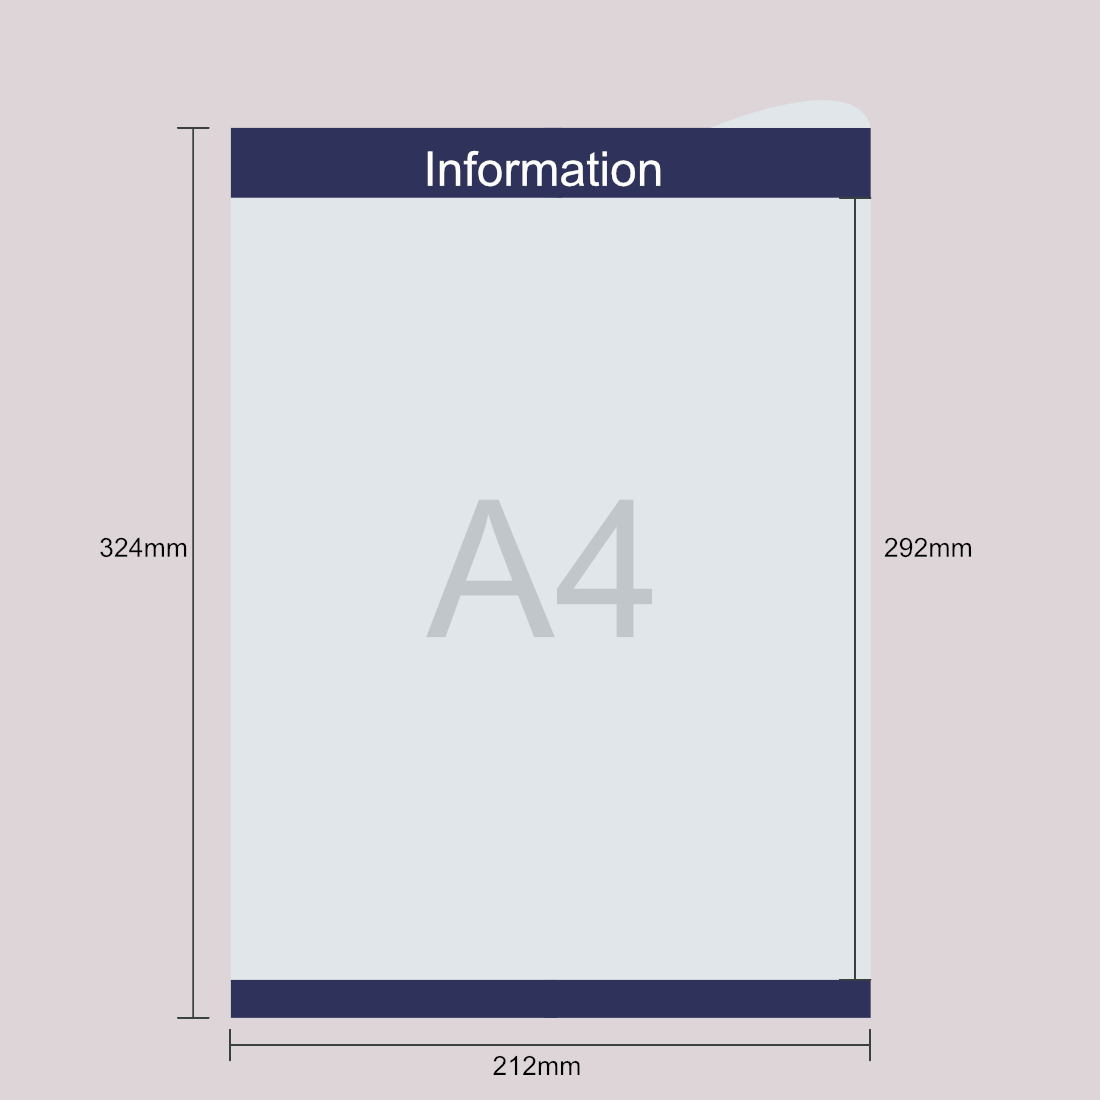 A4 information holders wall mounted